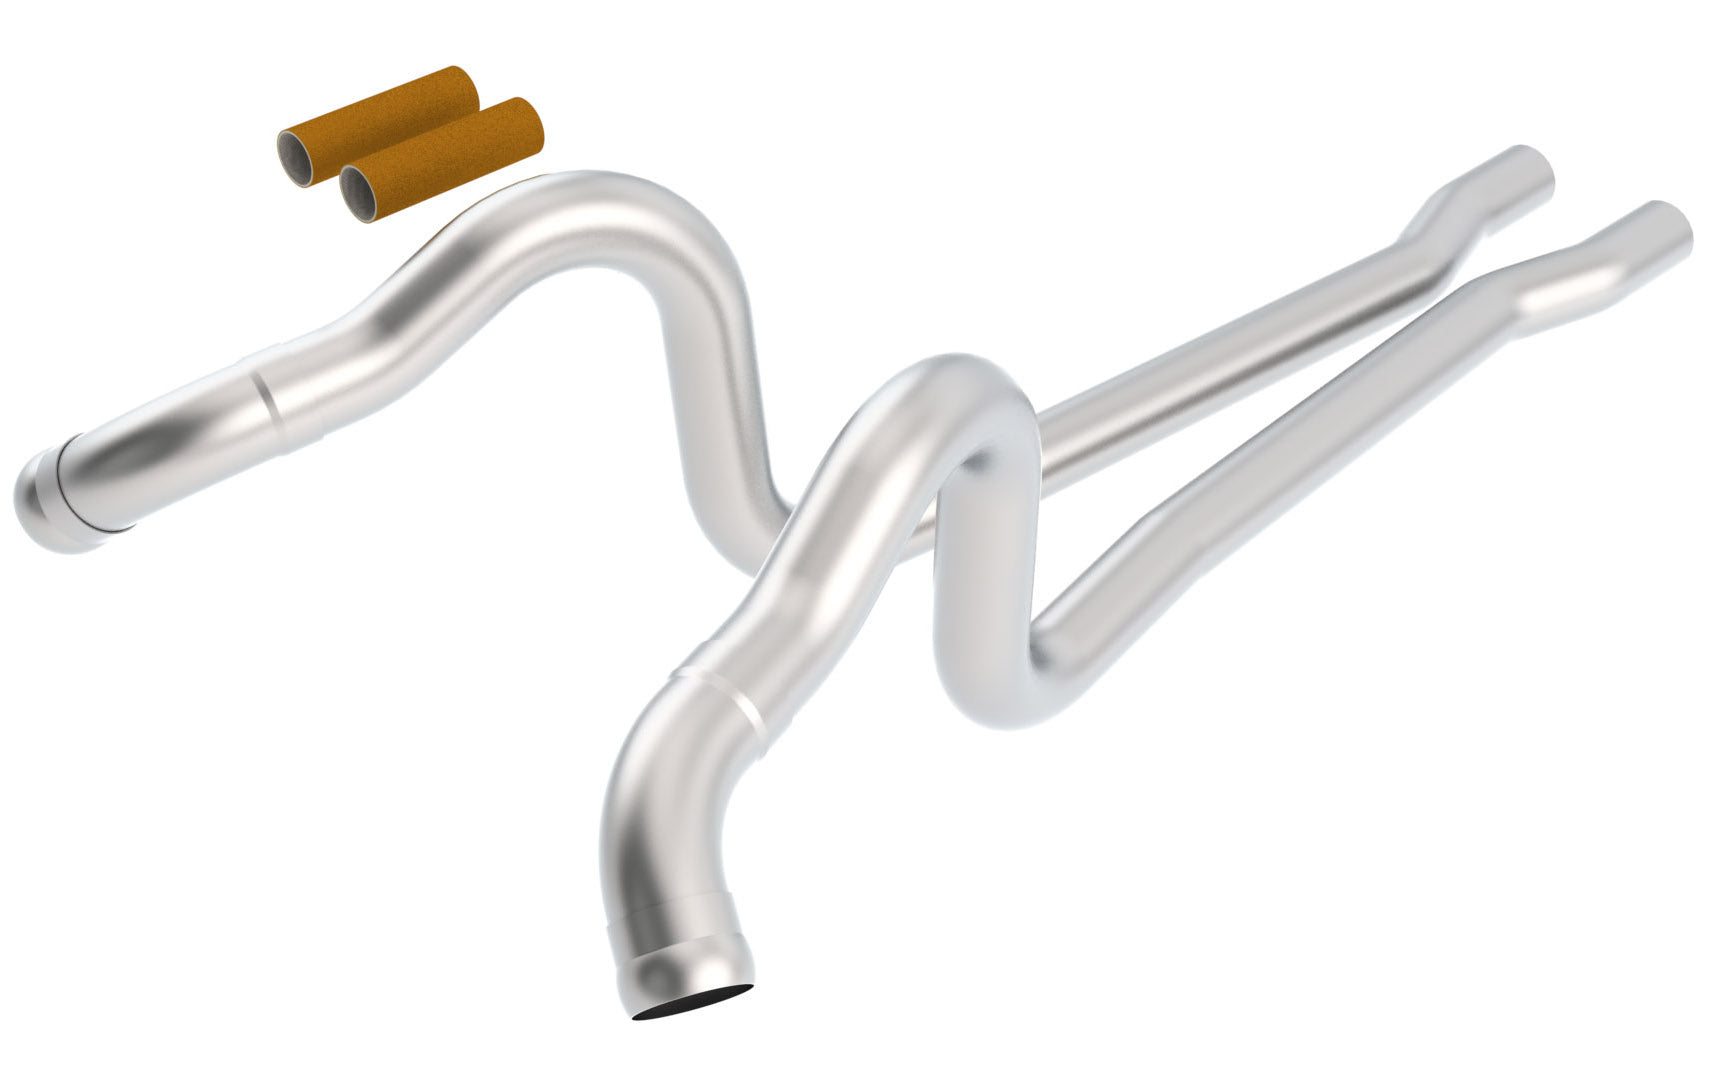 BORLA 60521 Exhaust System X-Pipes, Mid-Pipes, & Down-Pipes MUST 11- 12 OVER AXLE PIPES Photo-1 